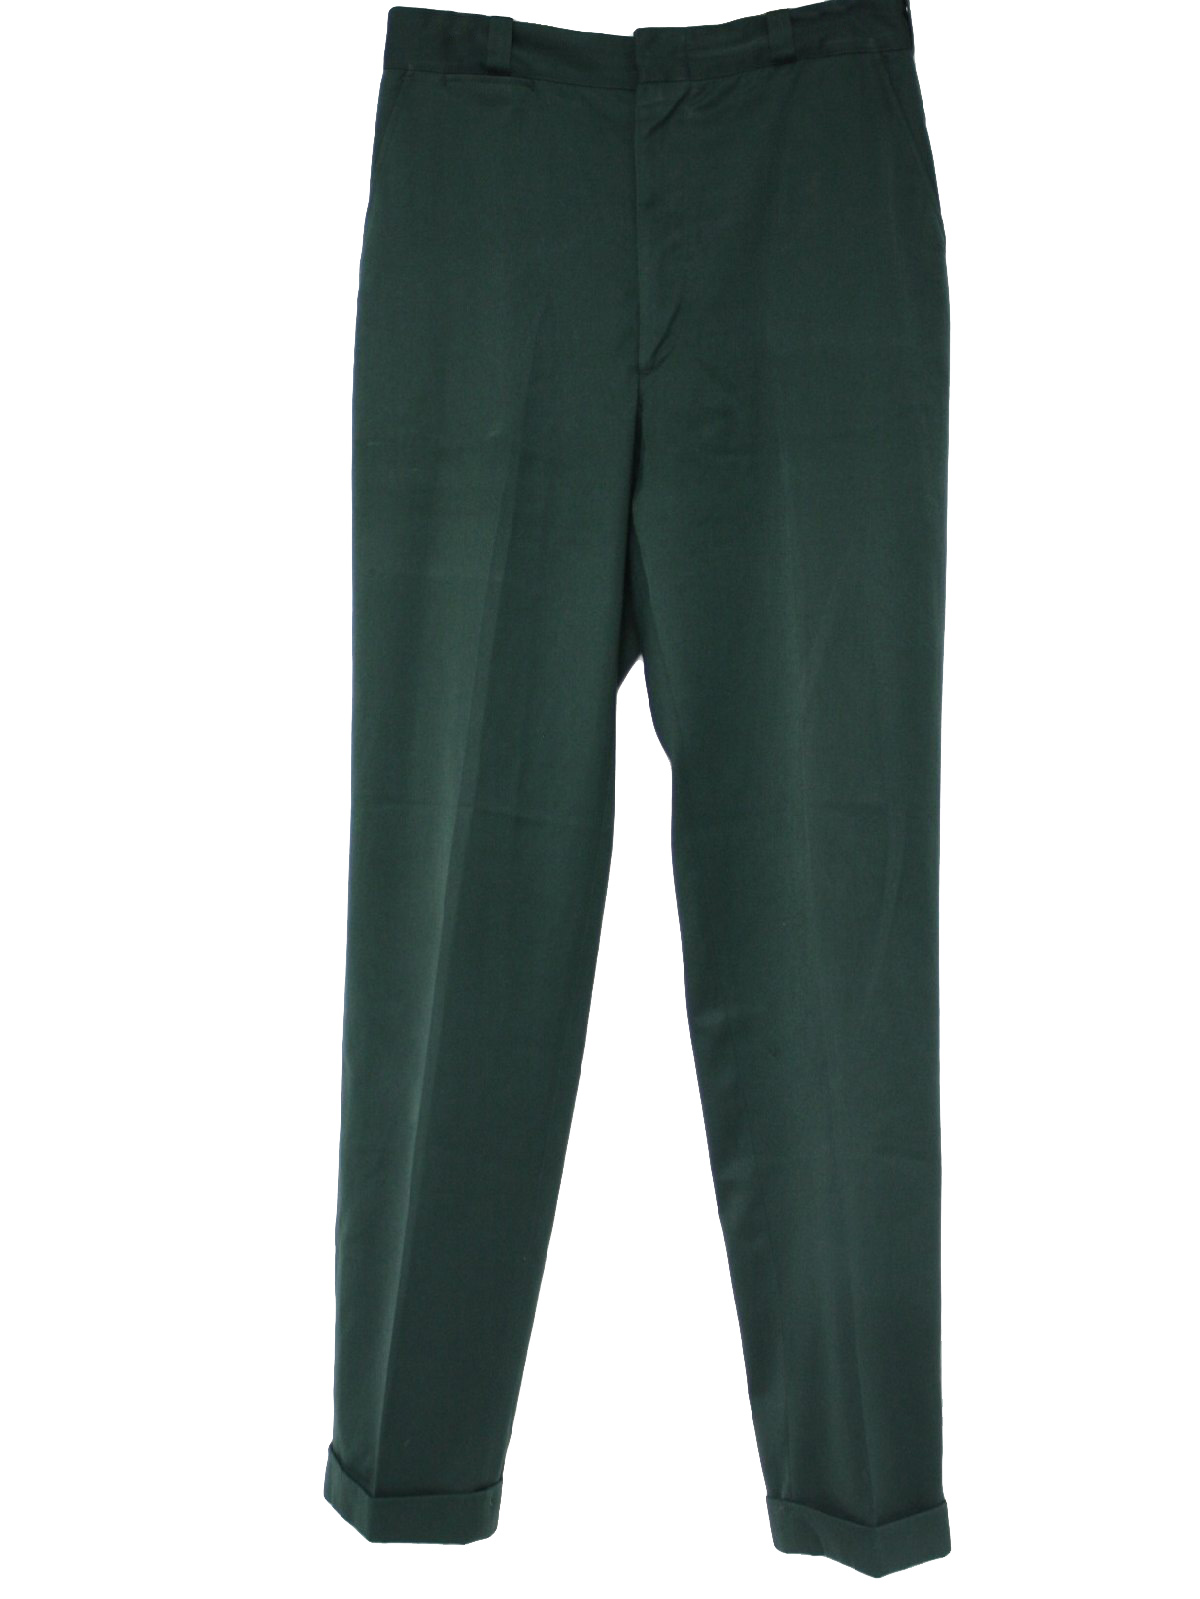 60s Retro Pants: Early 60s -No Label- Mens dark green cotton and ...